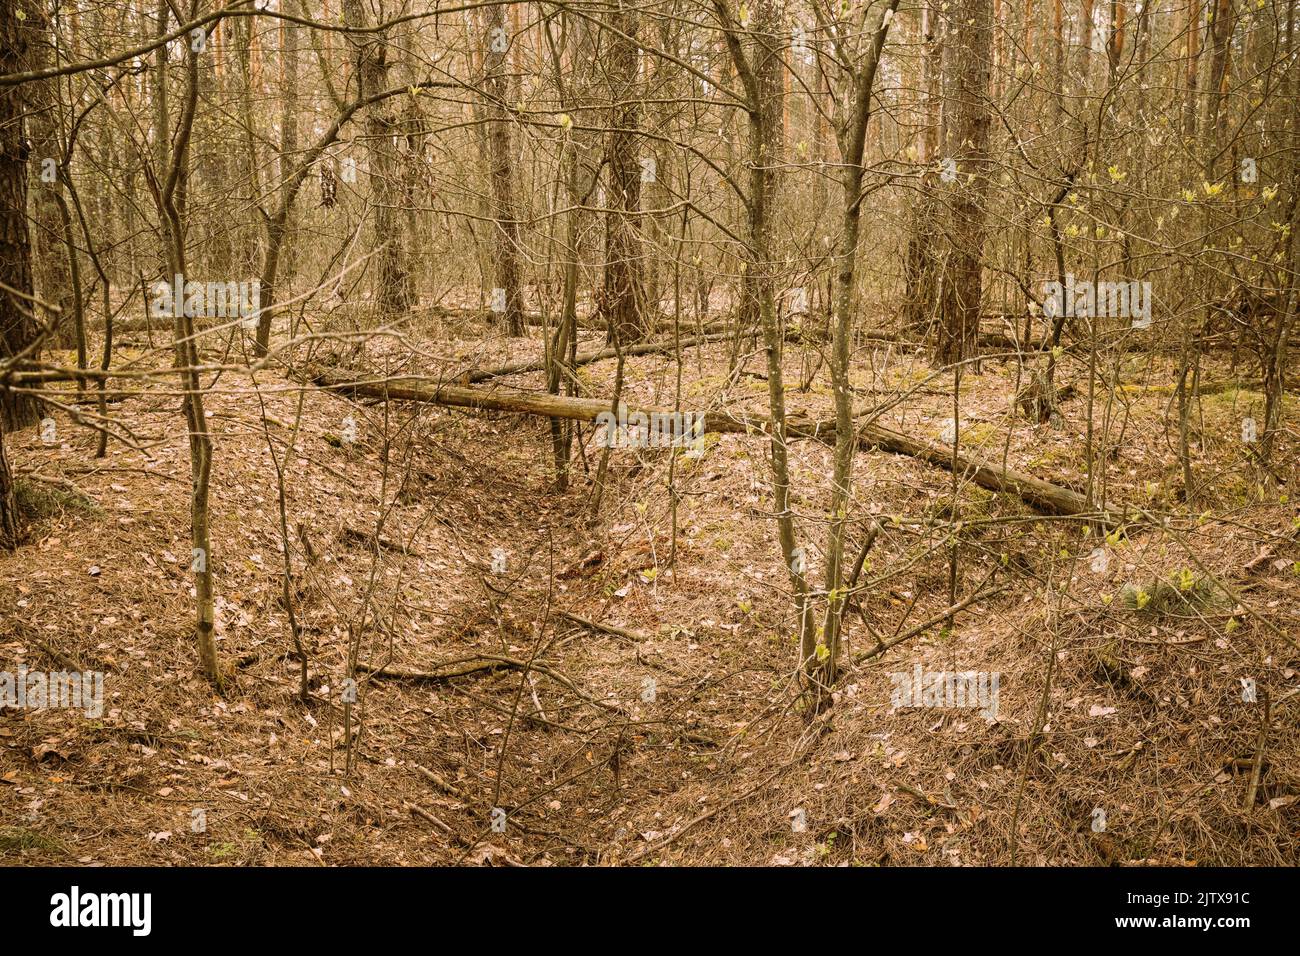 Old Abandoned World War II Trenches In Forest Since Second World War In Belarus. Early Spring or Autumn Season. Stock Photo